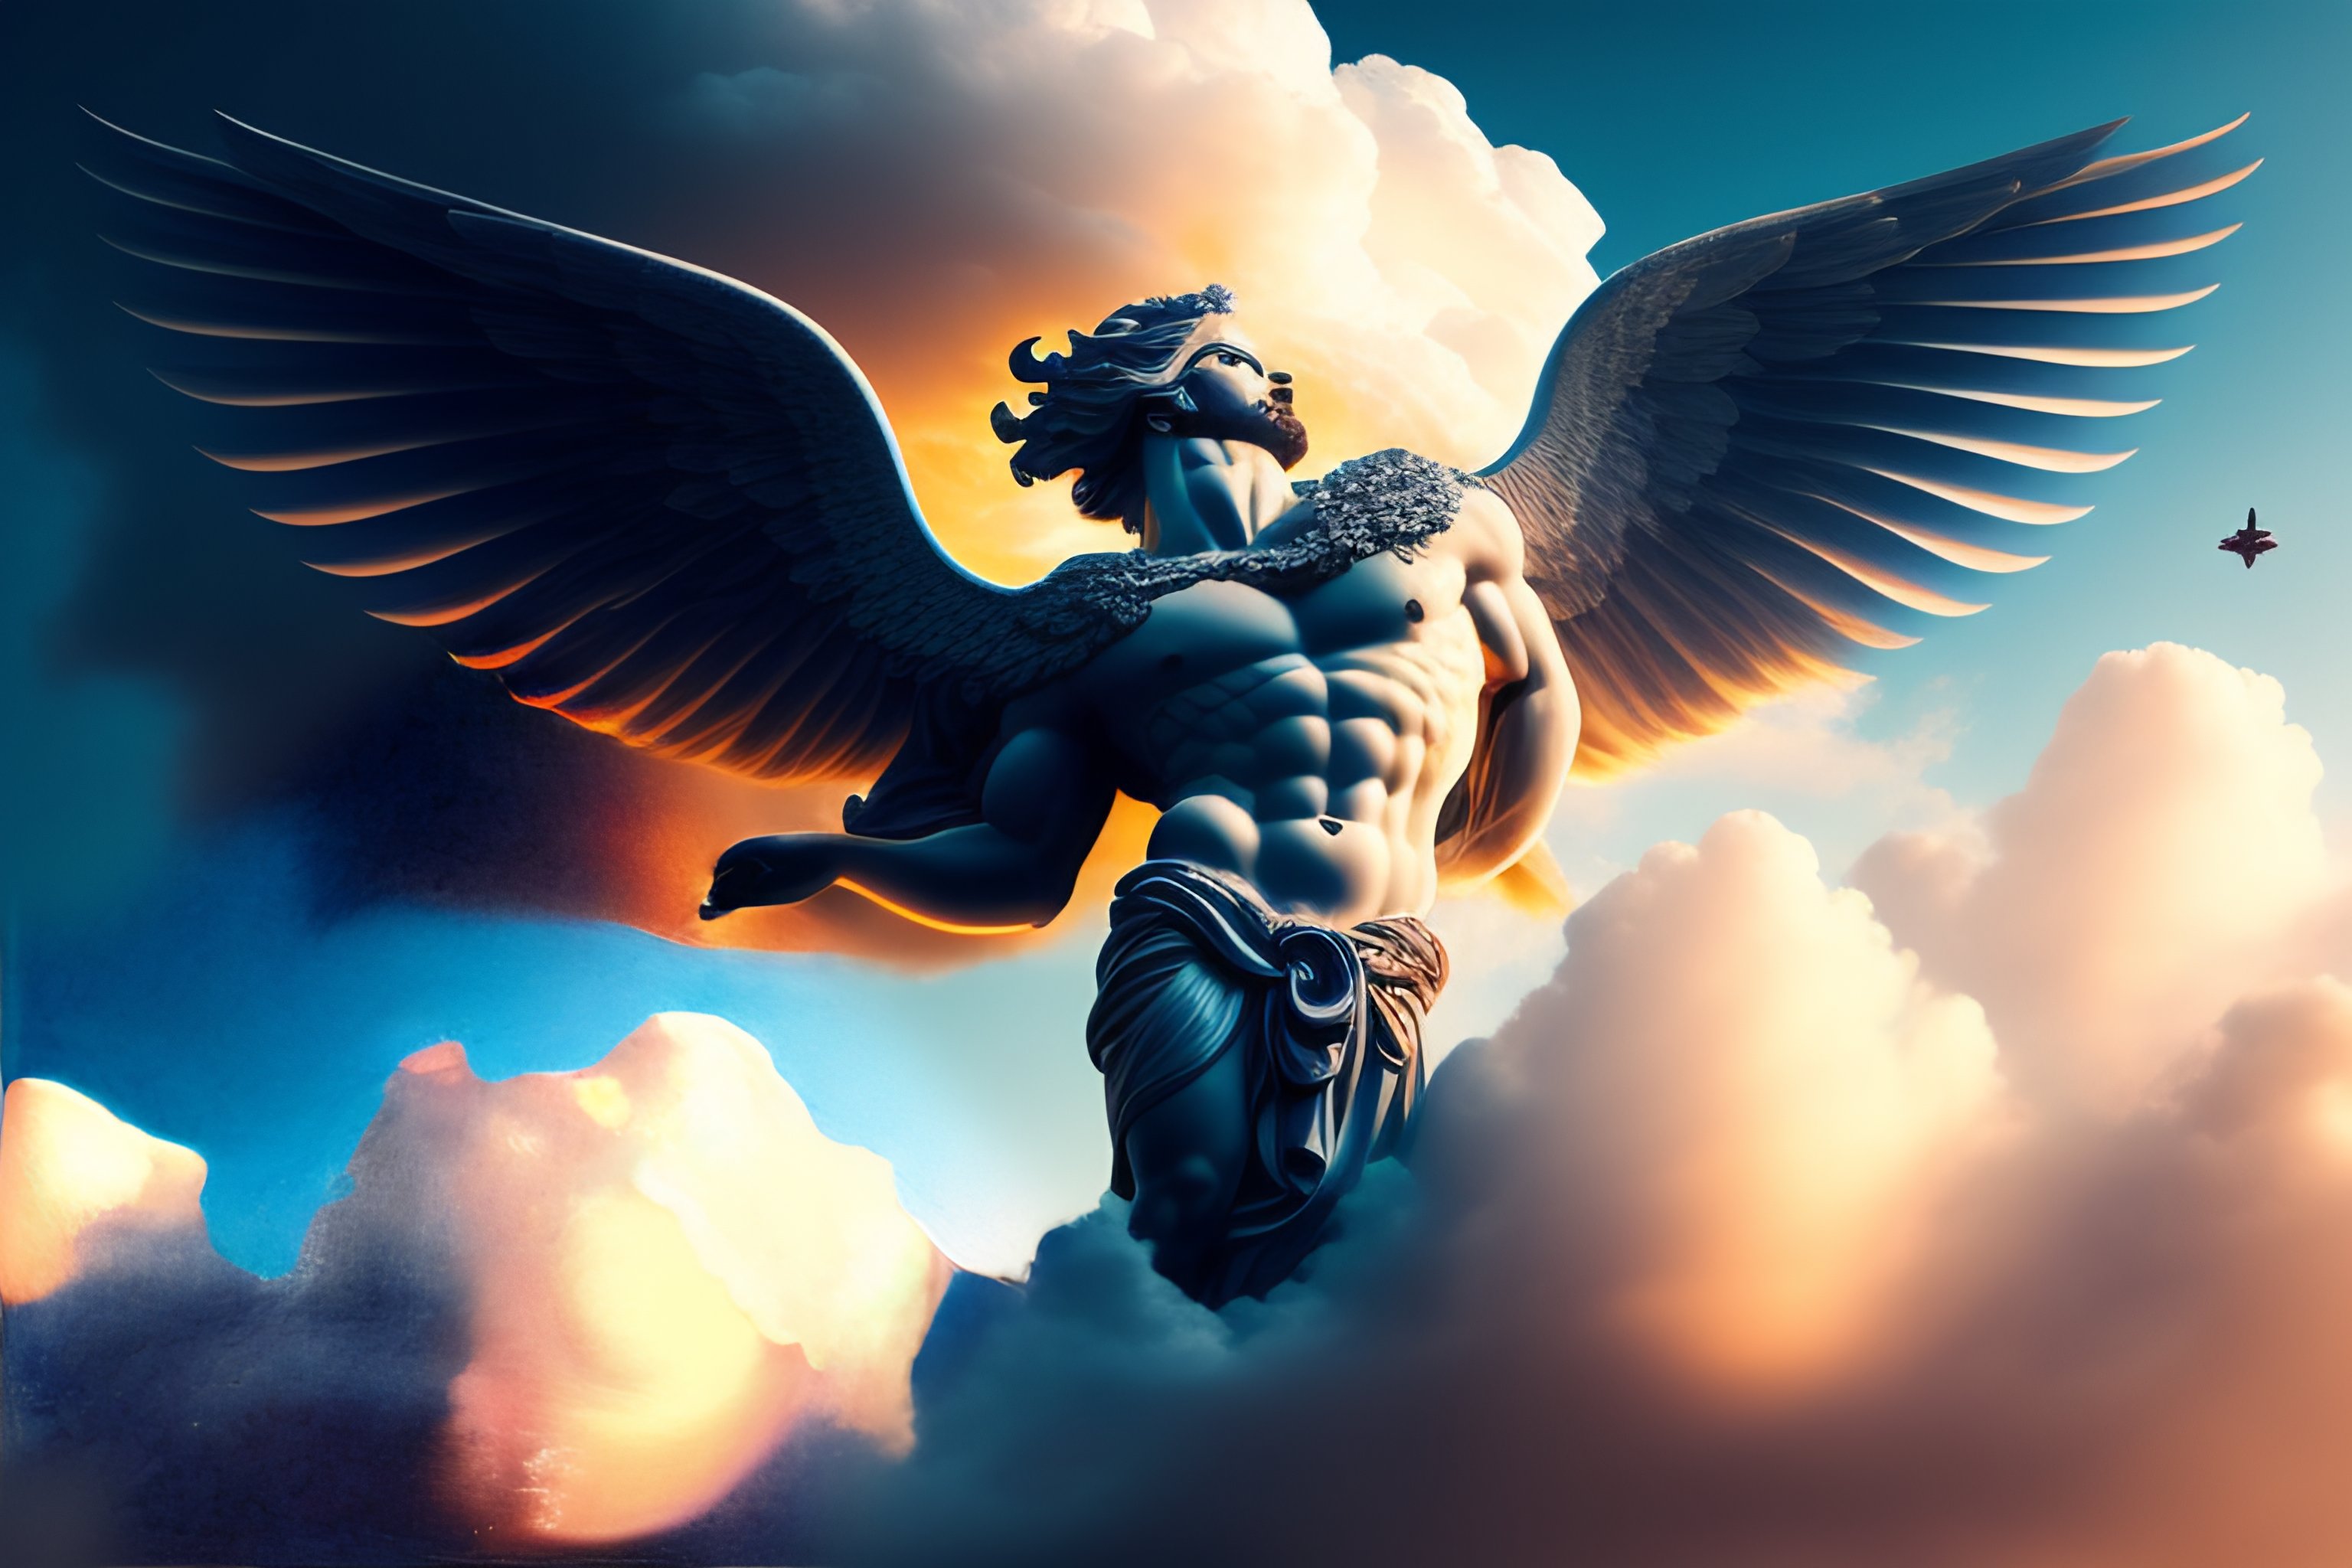 Lexica - A god from Greek mythology flying in the clouds